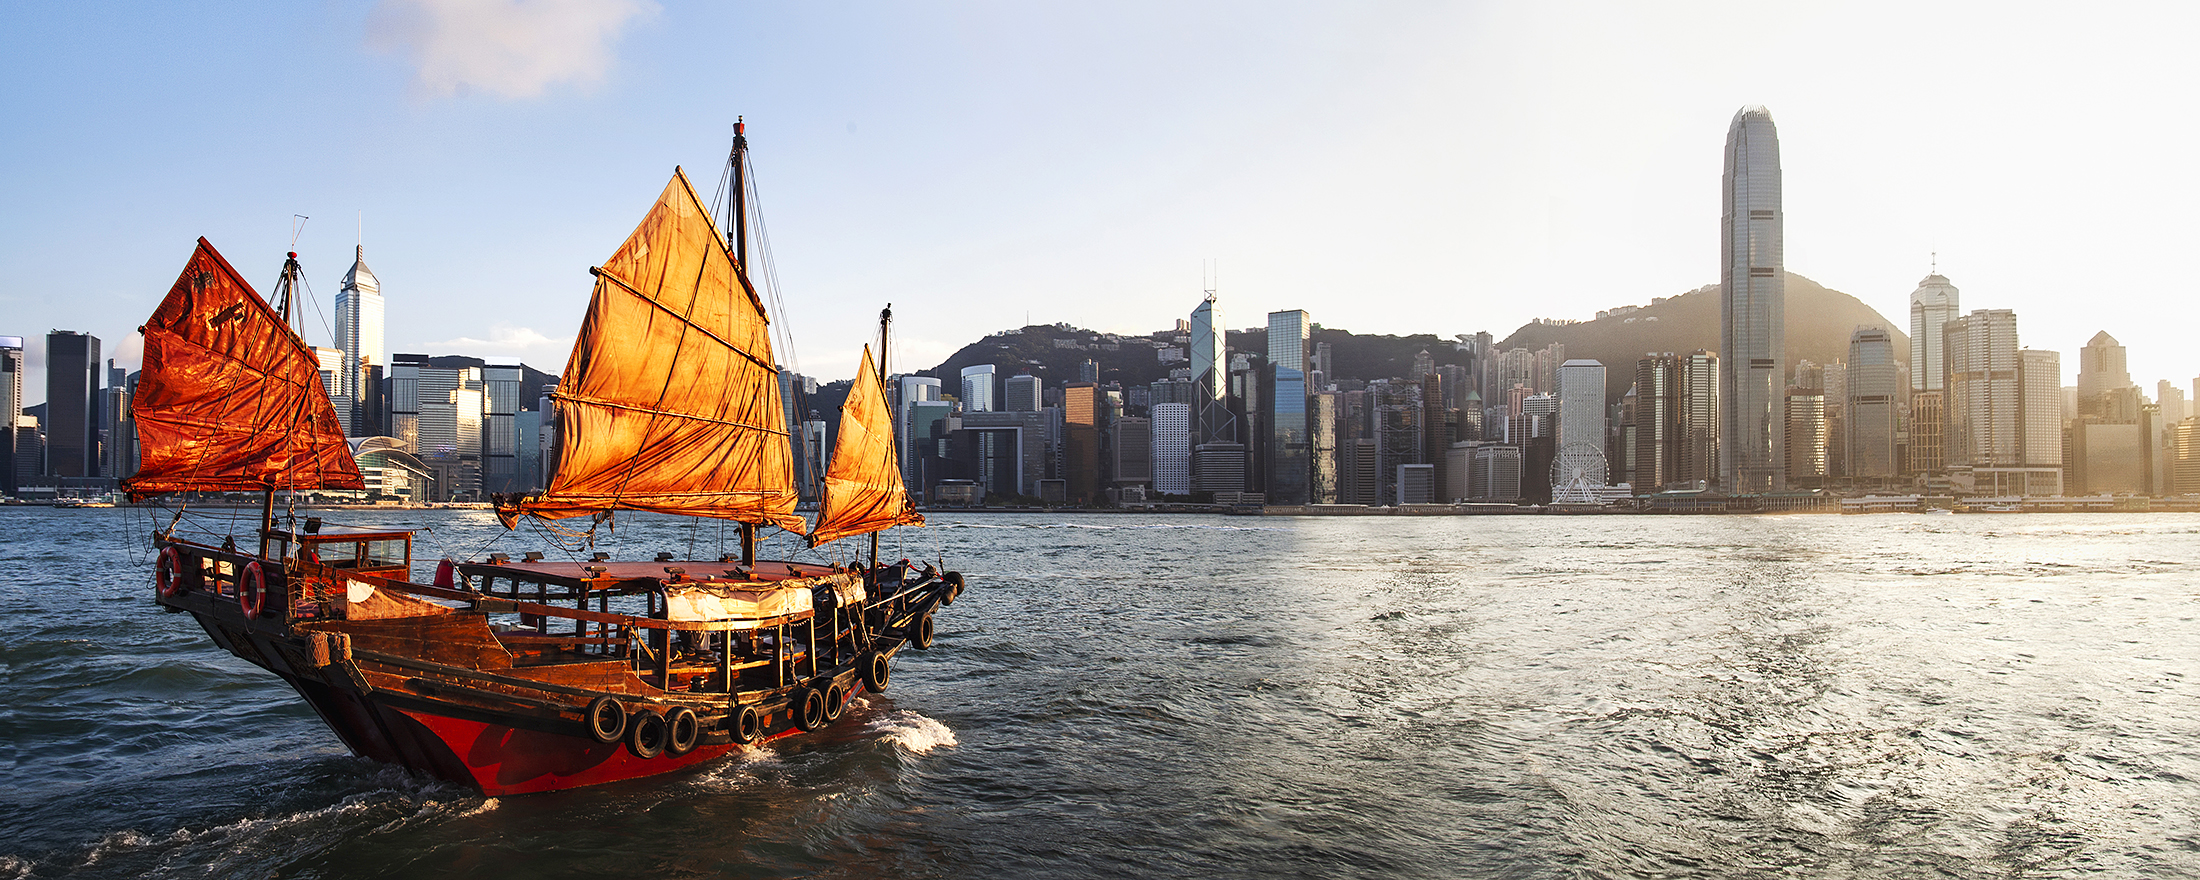 Business Class from Denmark to Hong Kong for €1,596 Round Trip on SWISS Airlines